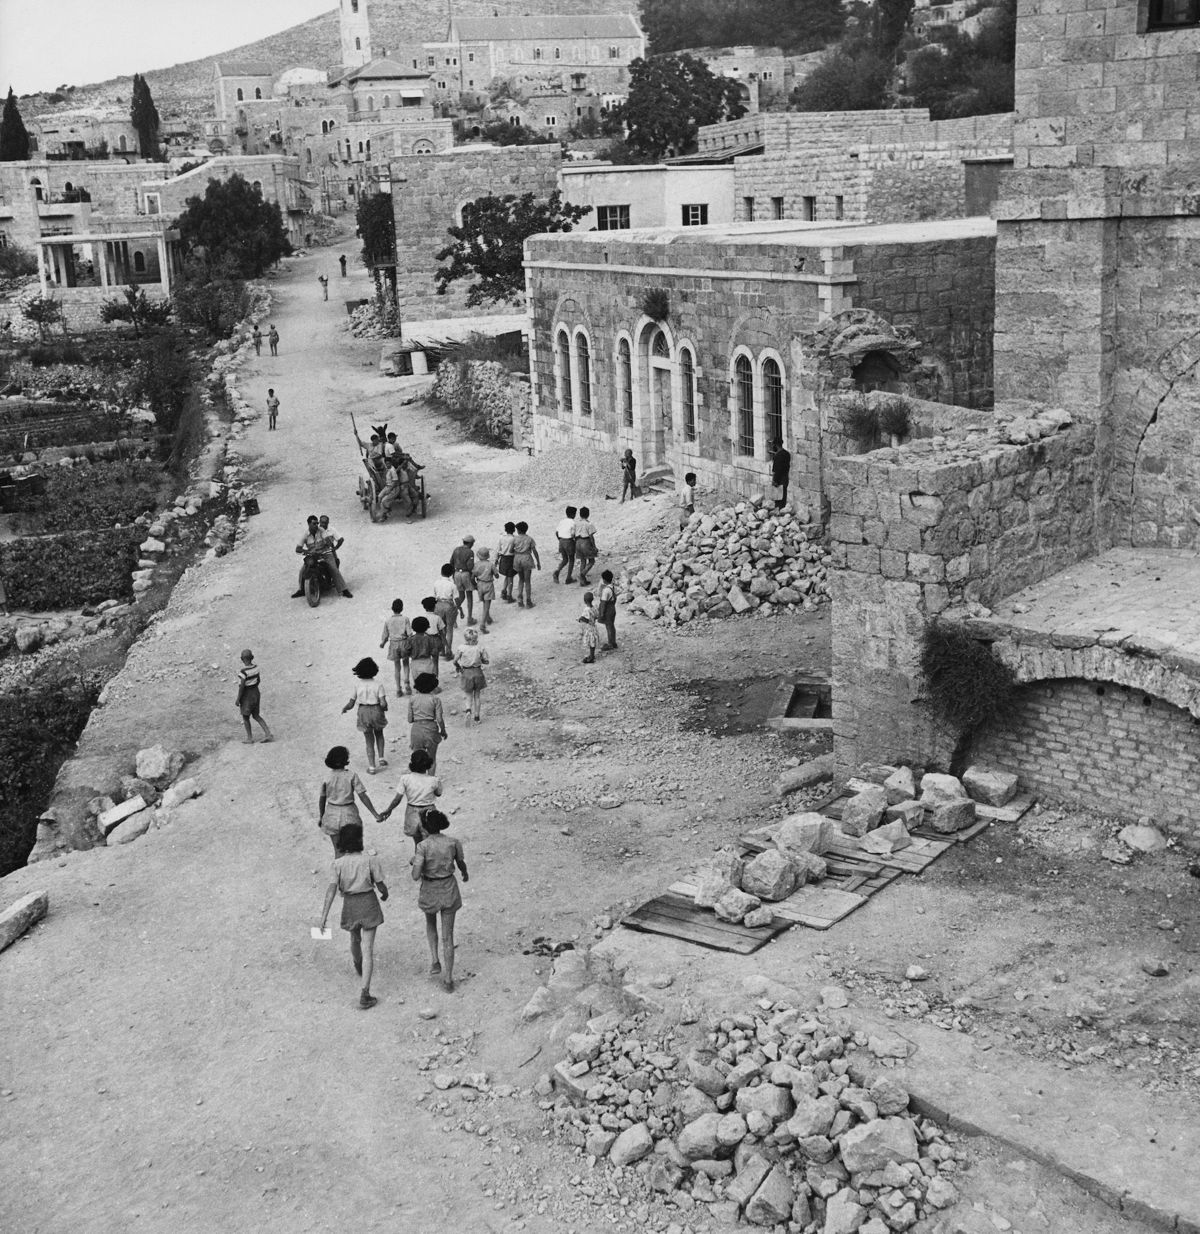 <i>George Pickow/Three Lions/Hulton Archive/Getty Images via CNN Newsource</i><br/>Israeli students on their way to school in Ein Karem circa 1955. The buildings on the right show damage dating from the 1948 Arab-Israeli War.